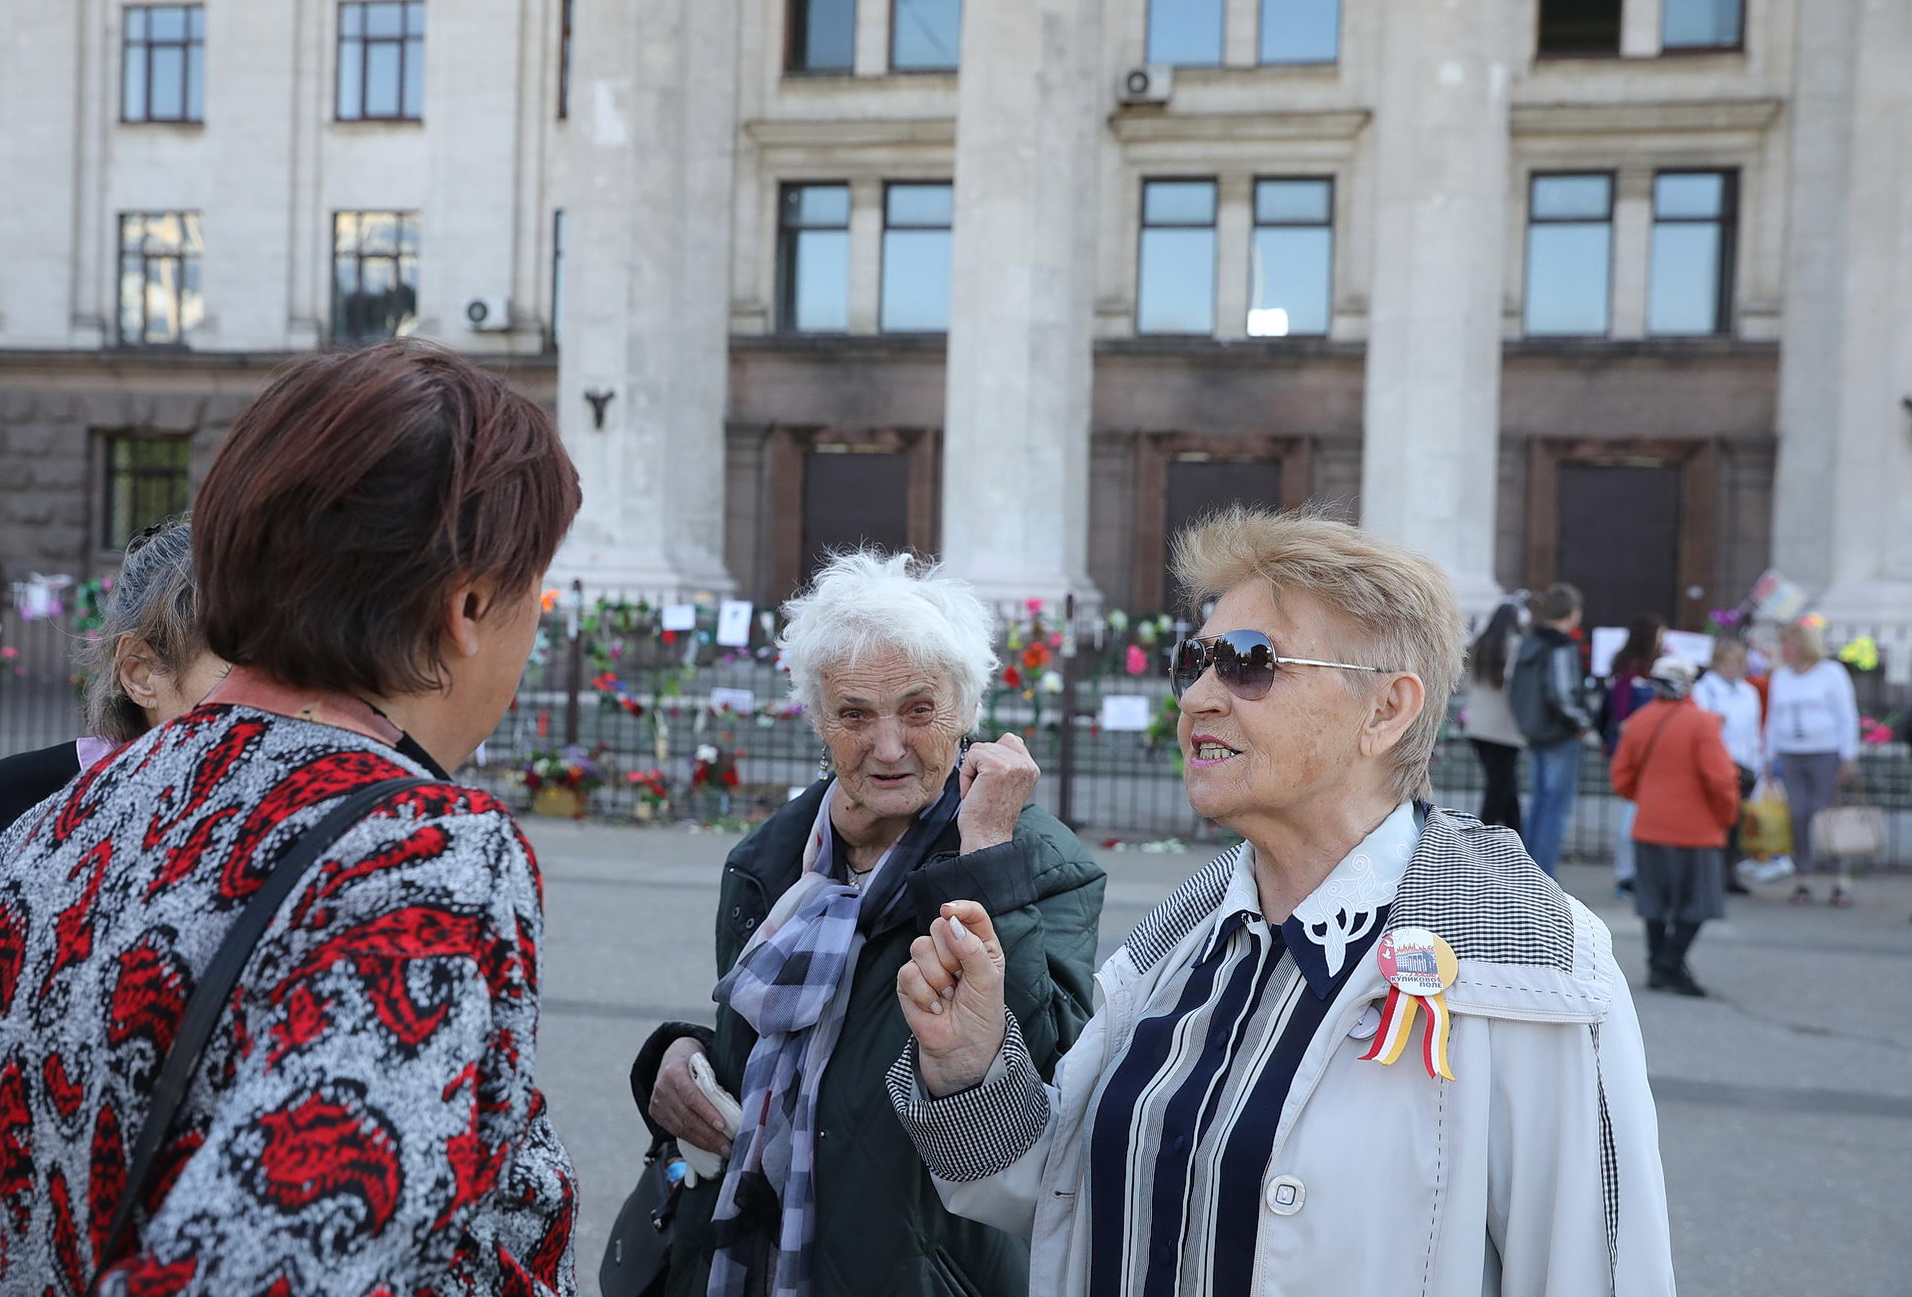 Pro-Russian activists talk near the Trade Unions House in Odesa on May 12, 2019. Many of them are relatives or survivors of the fire that occurred in that building on May 2, 2014.